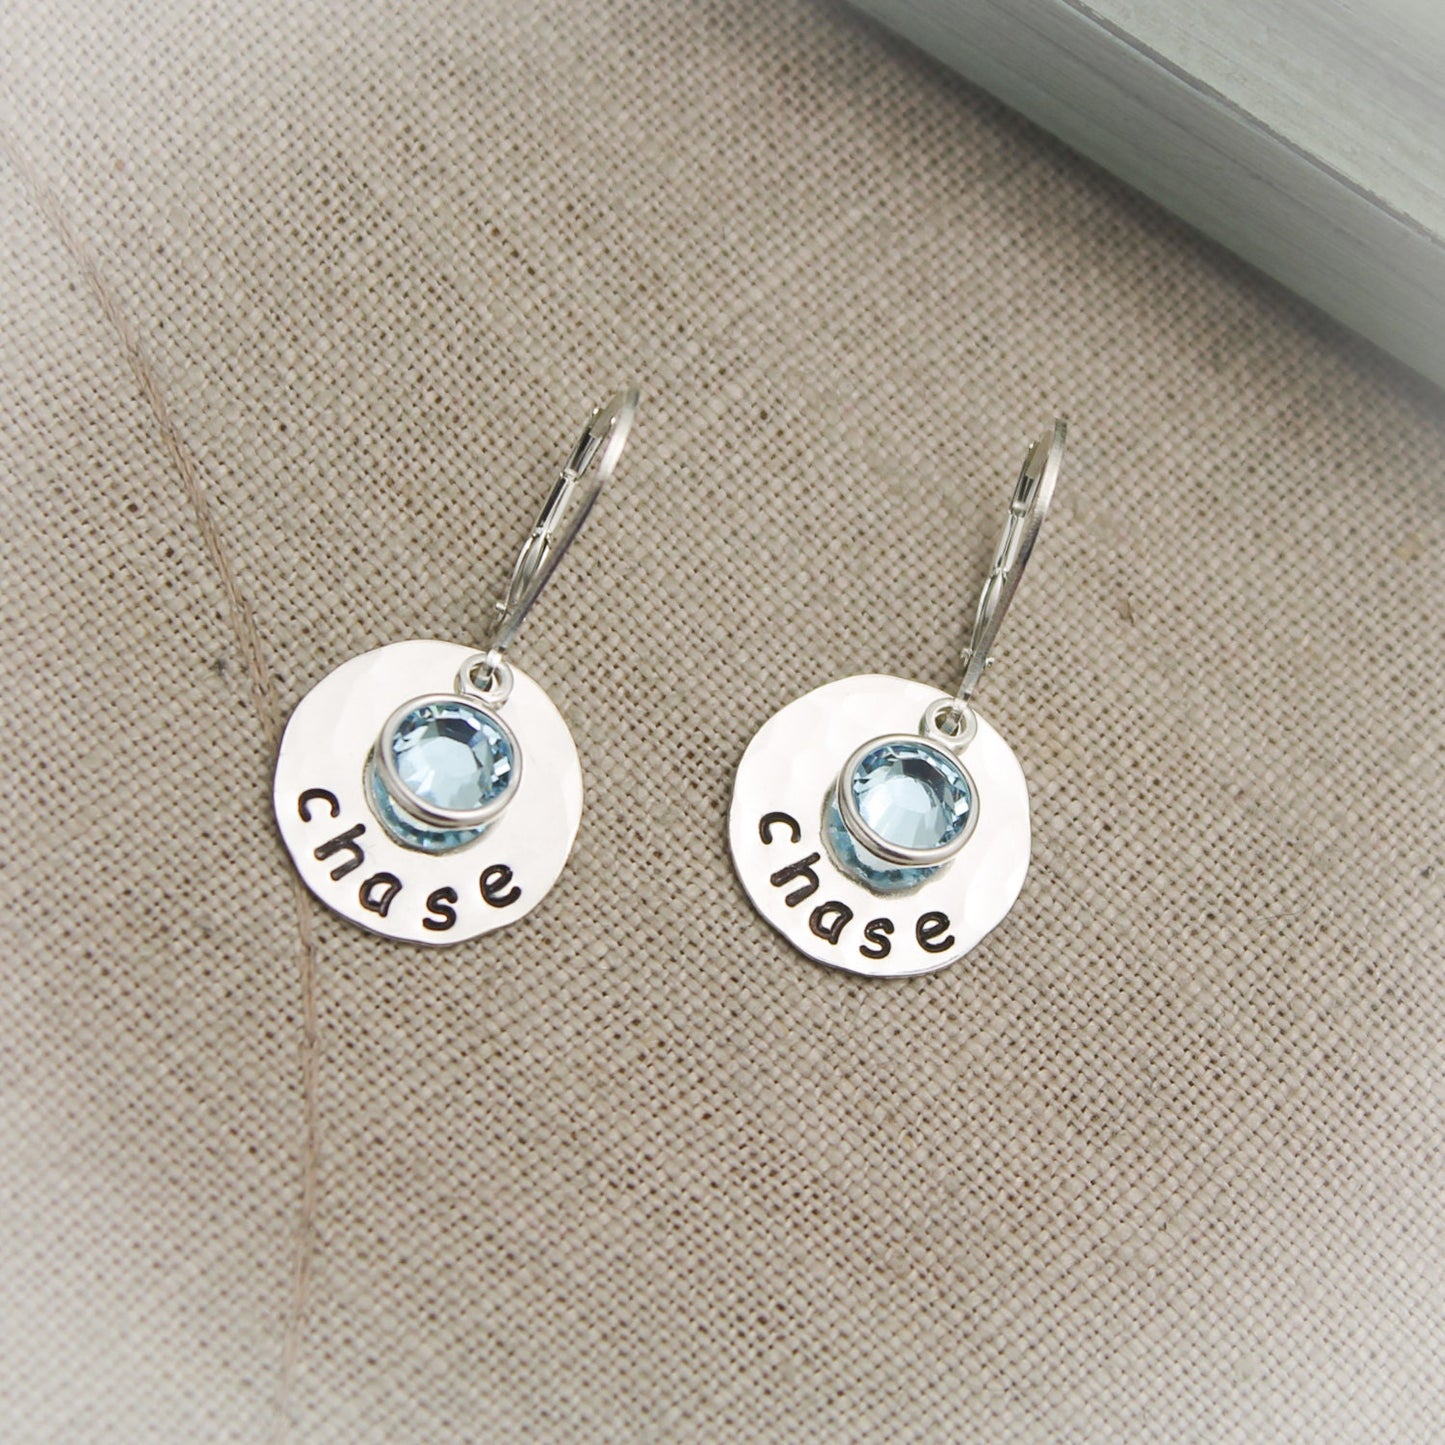 Mother or Grandmother Sterling Silver Earrings Hand Stamped Personalized with Name and Birthstone